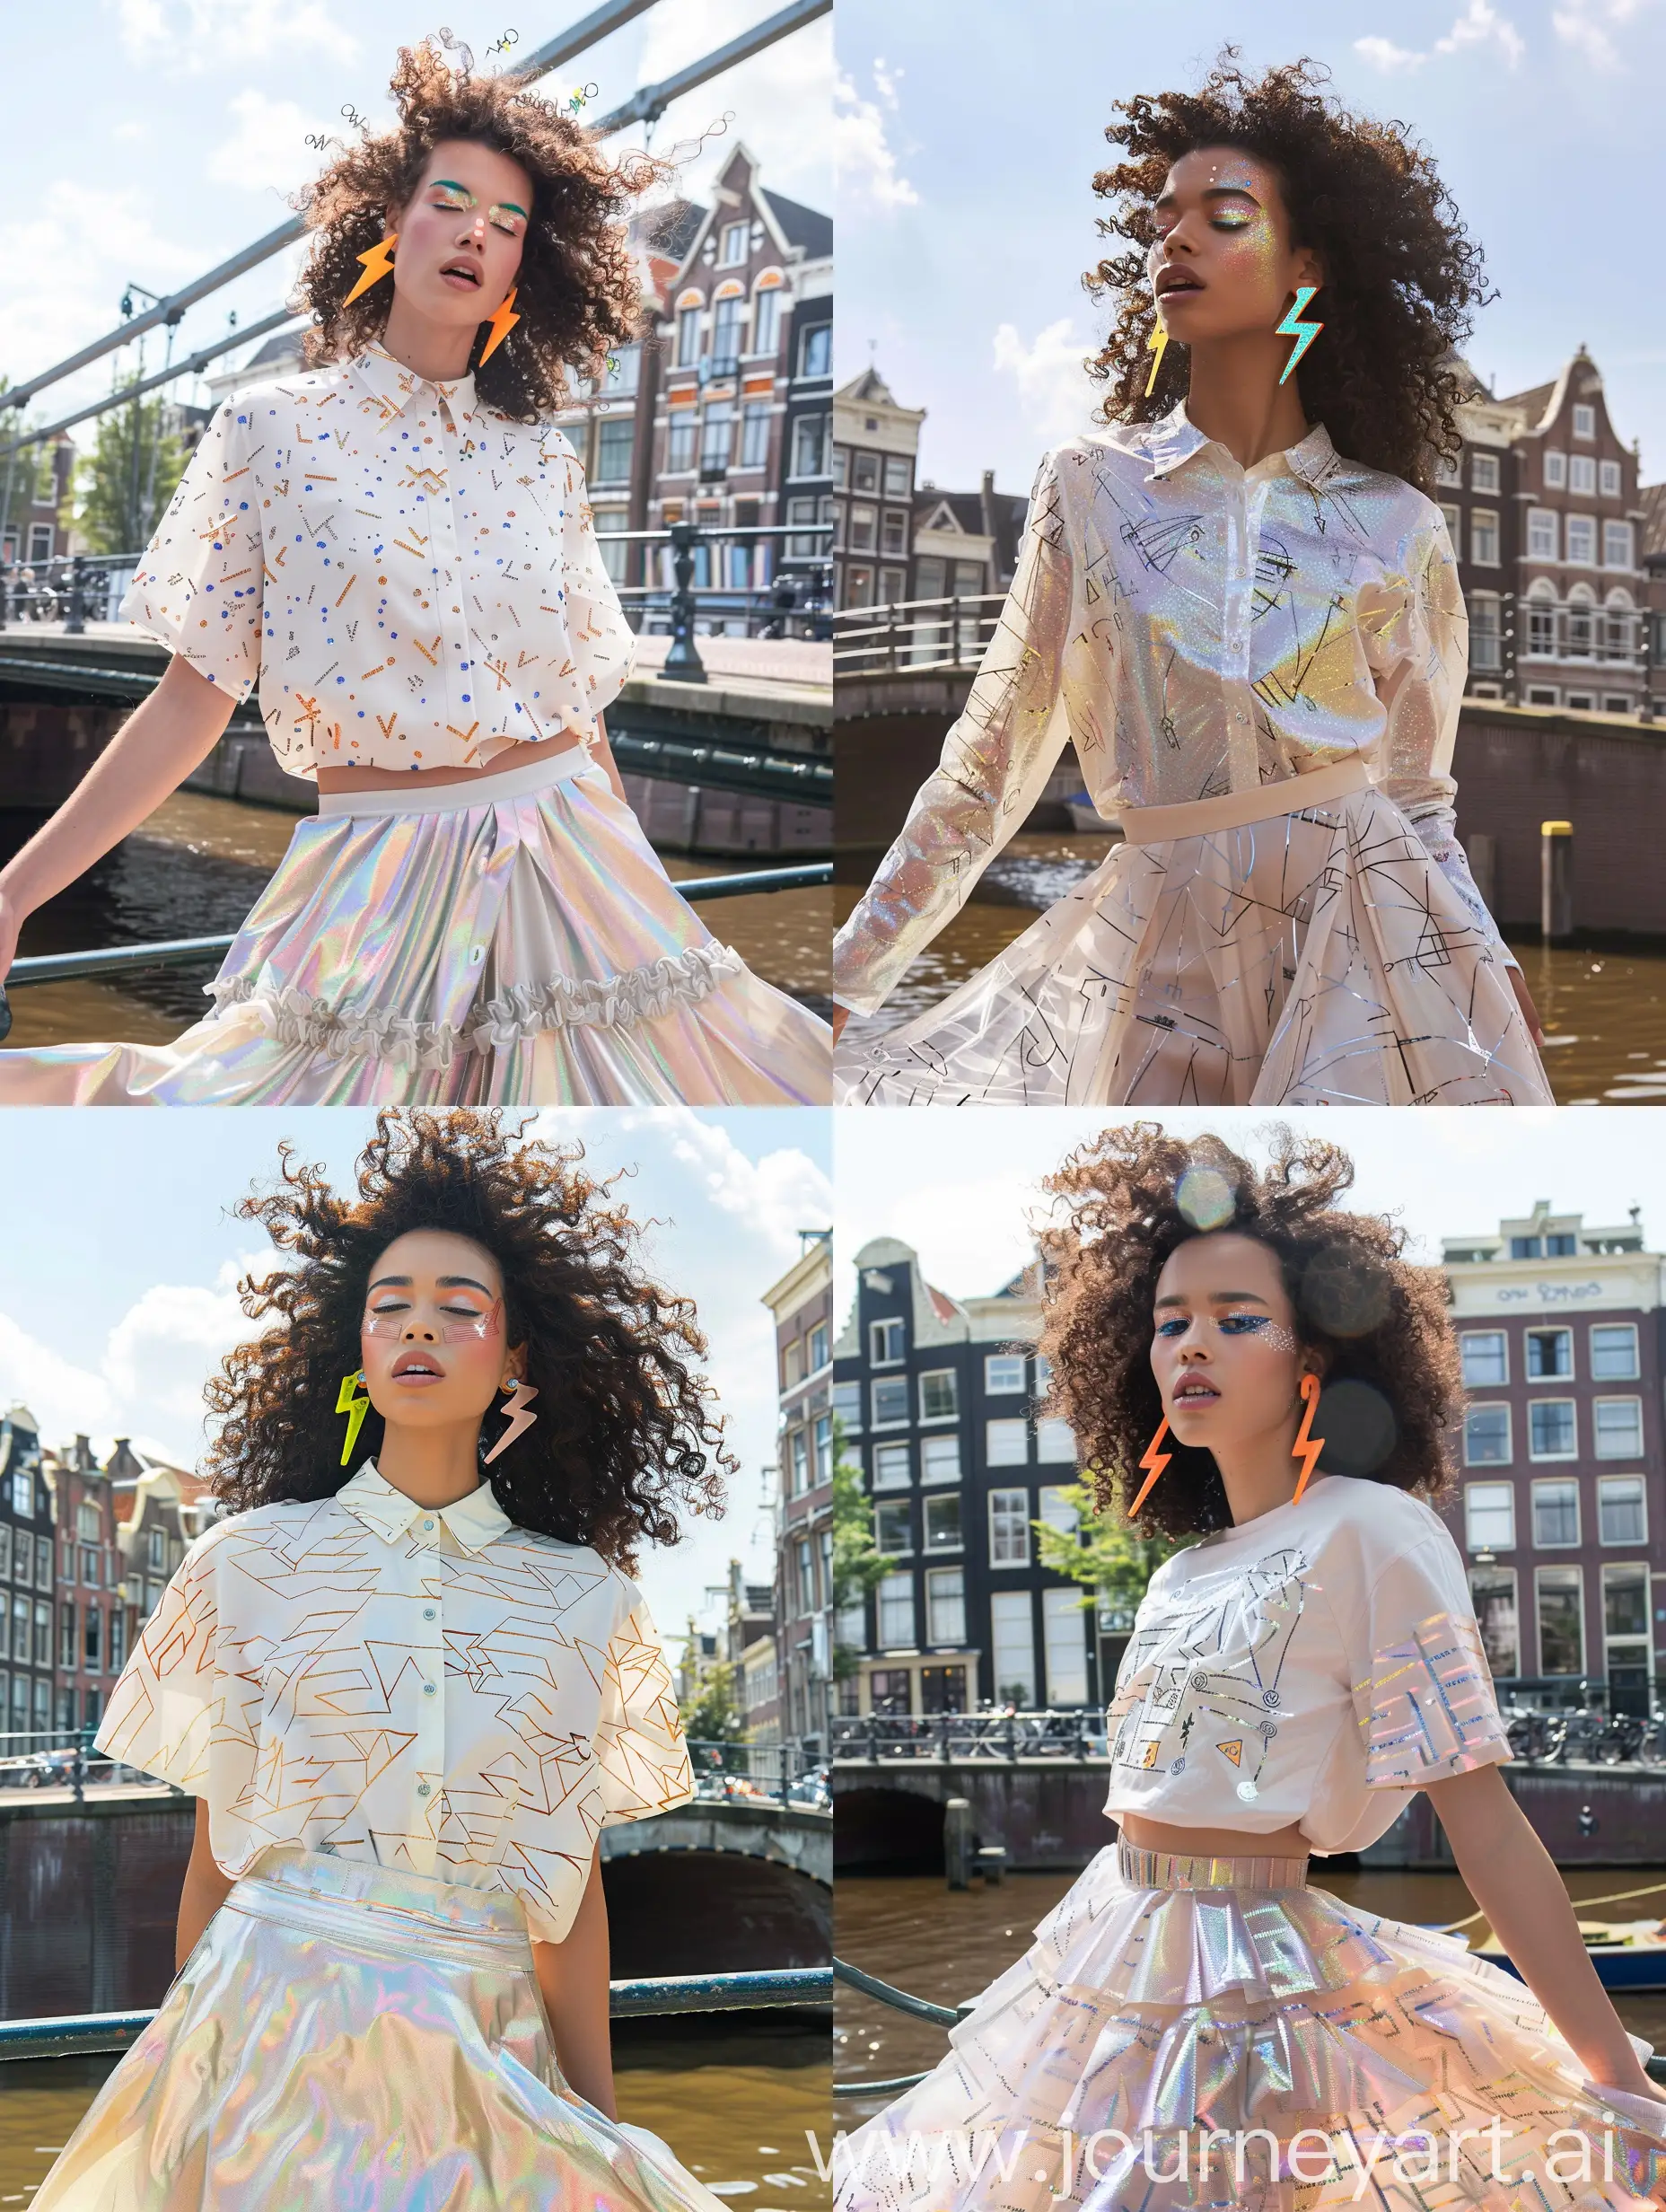 Curly-Model-Strutting-on-Amsterdam-Bridge-with-Trendy-Makeup-and-Geometric-Fashion